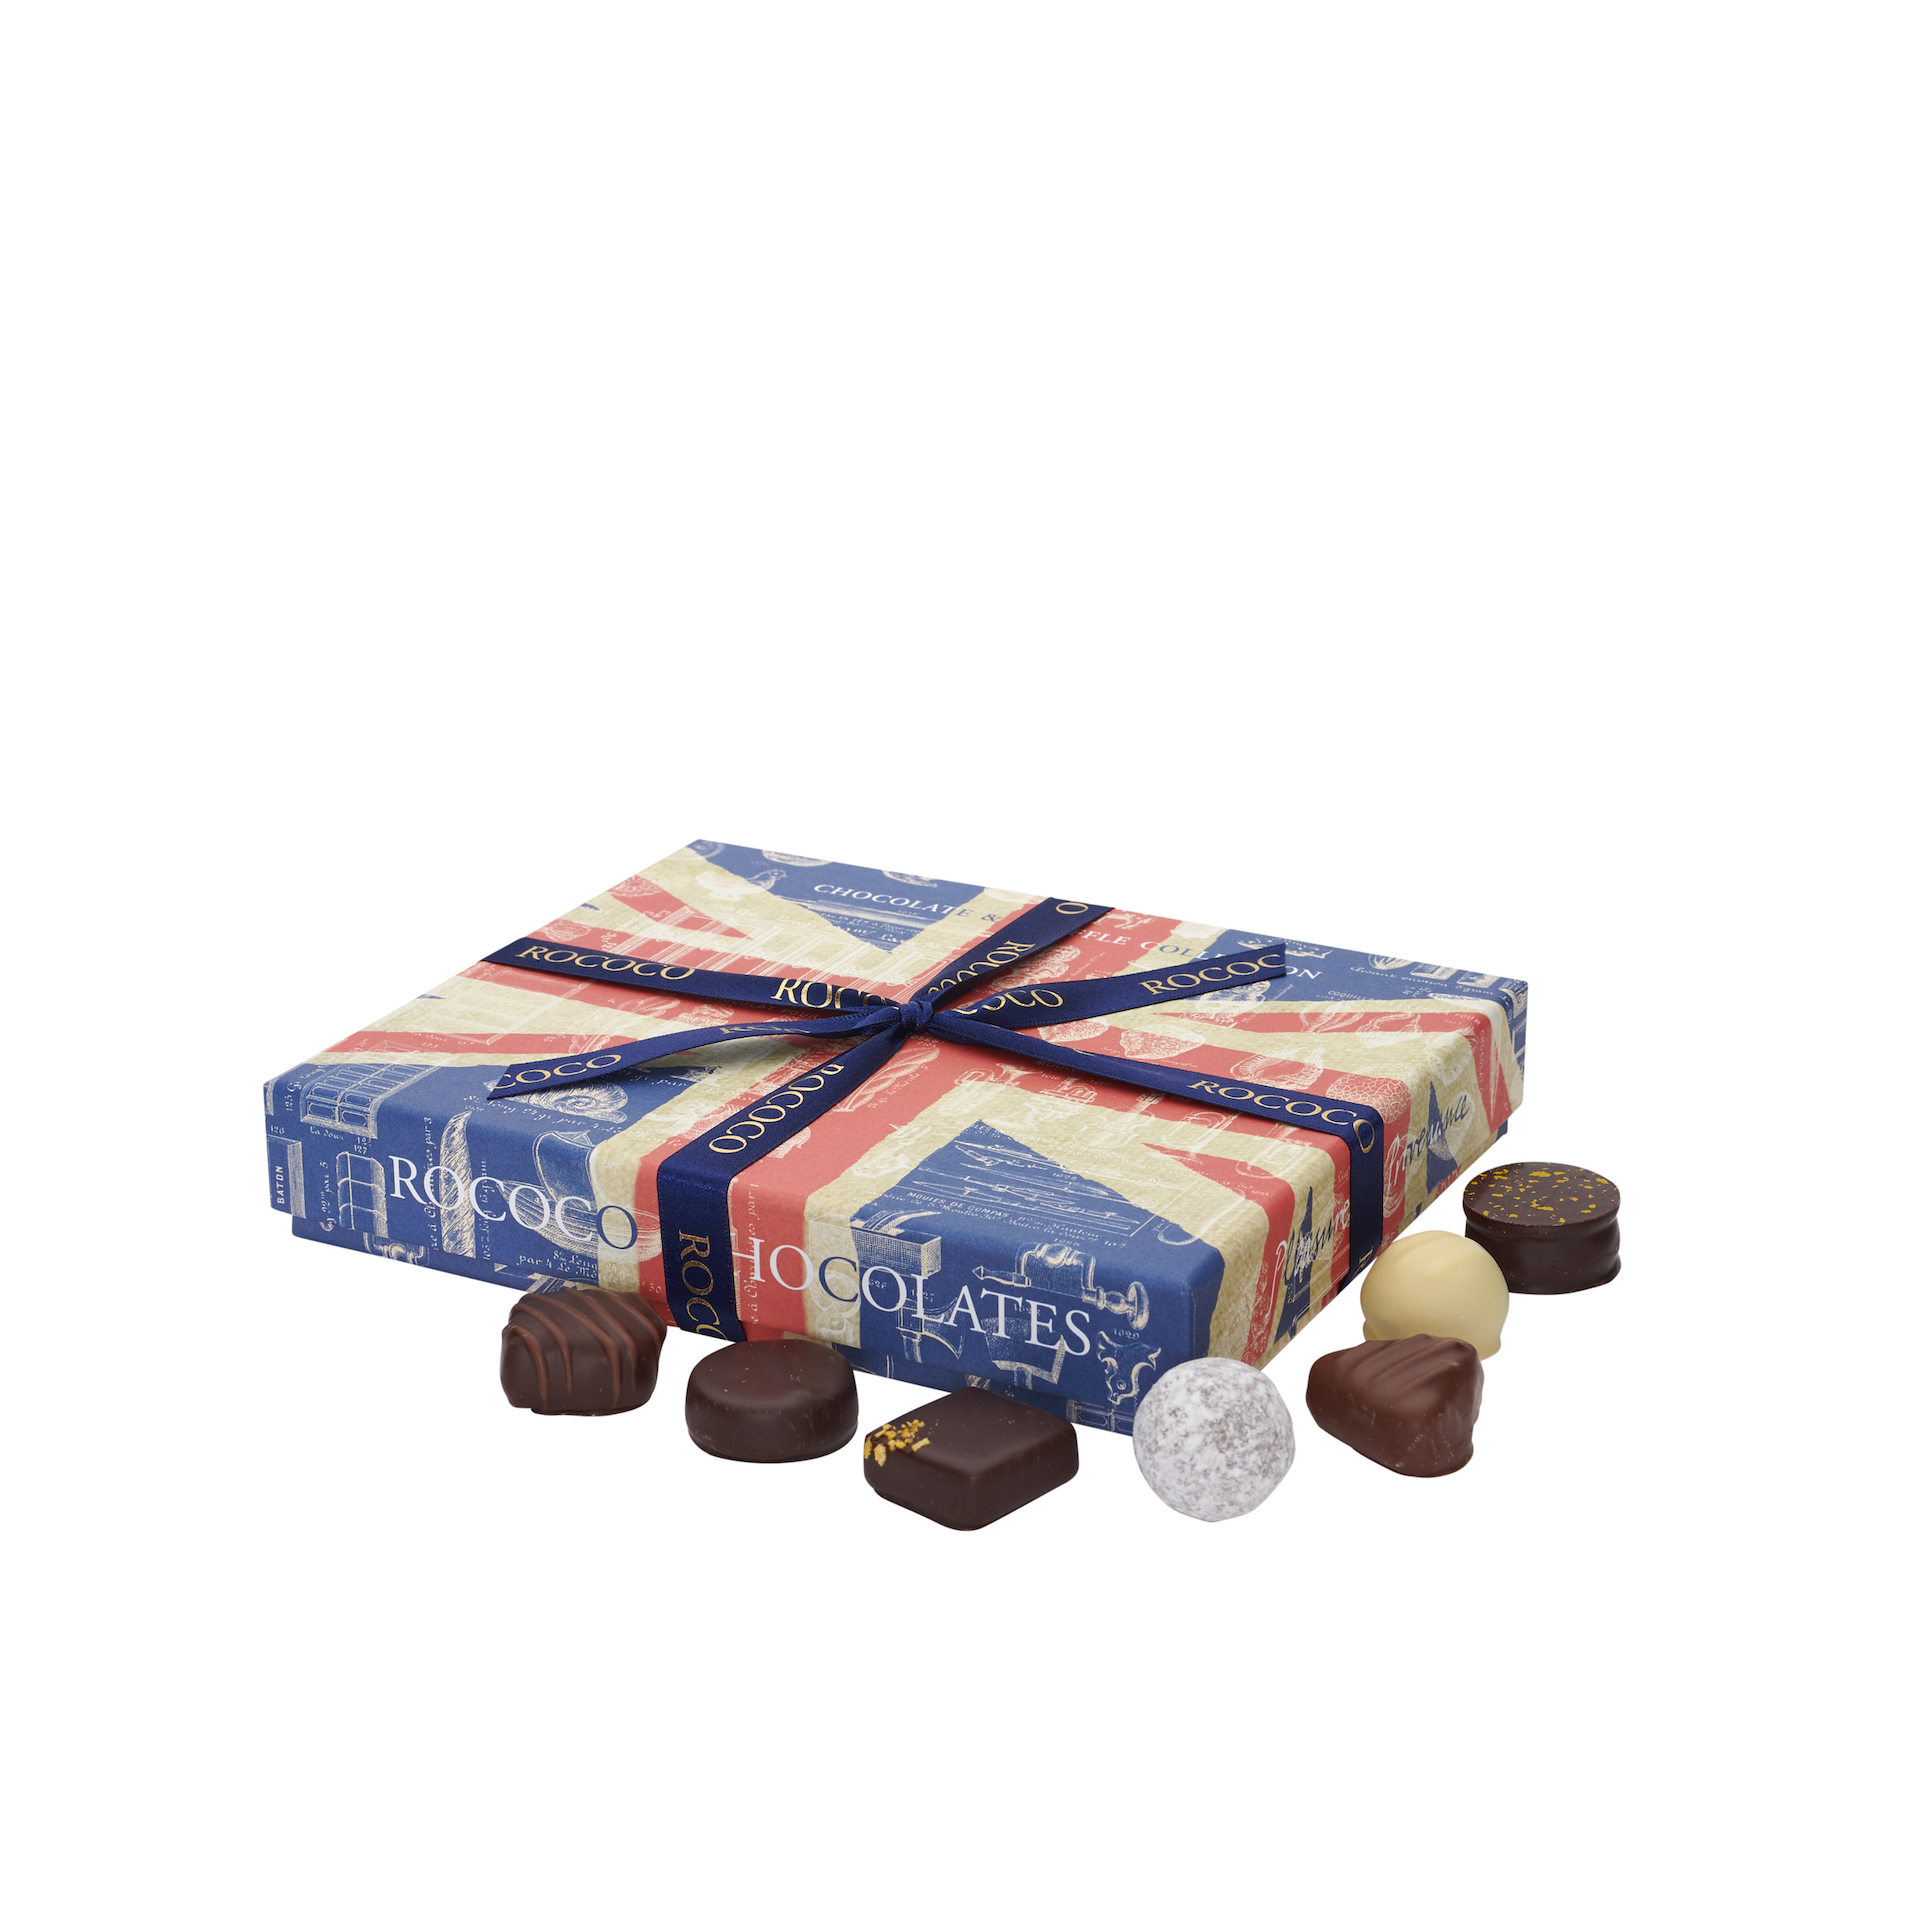 rococo-chocolates-union-jack-chocolate-and-truffle-collection-large